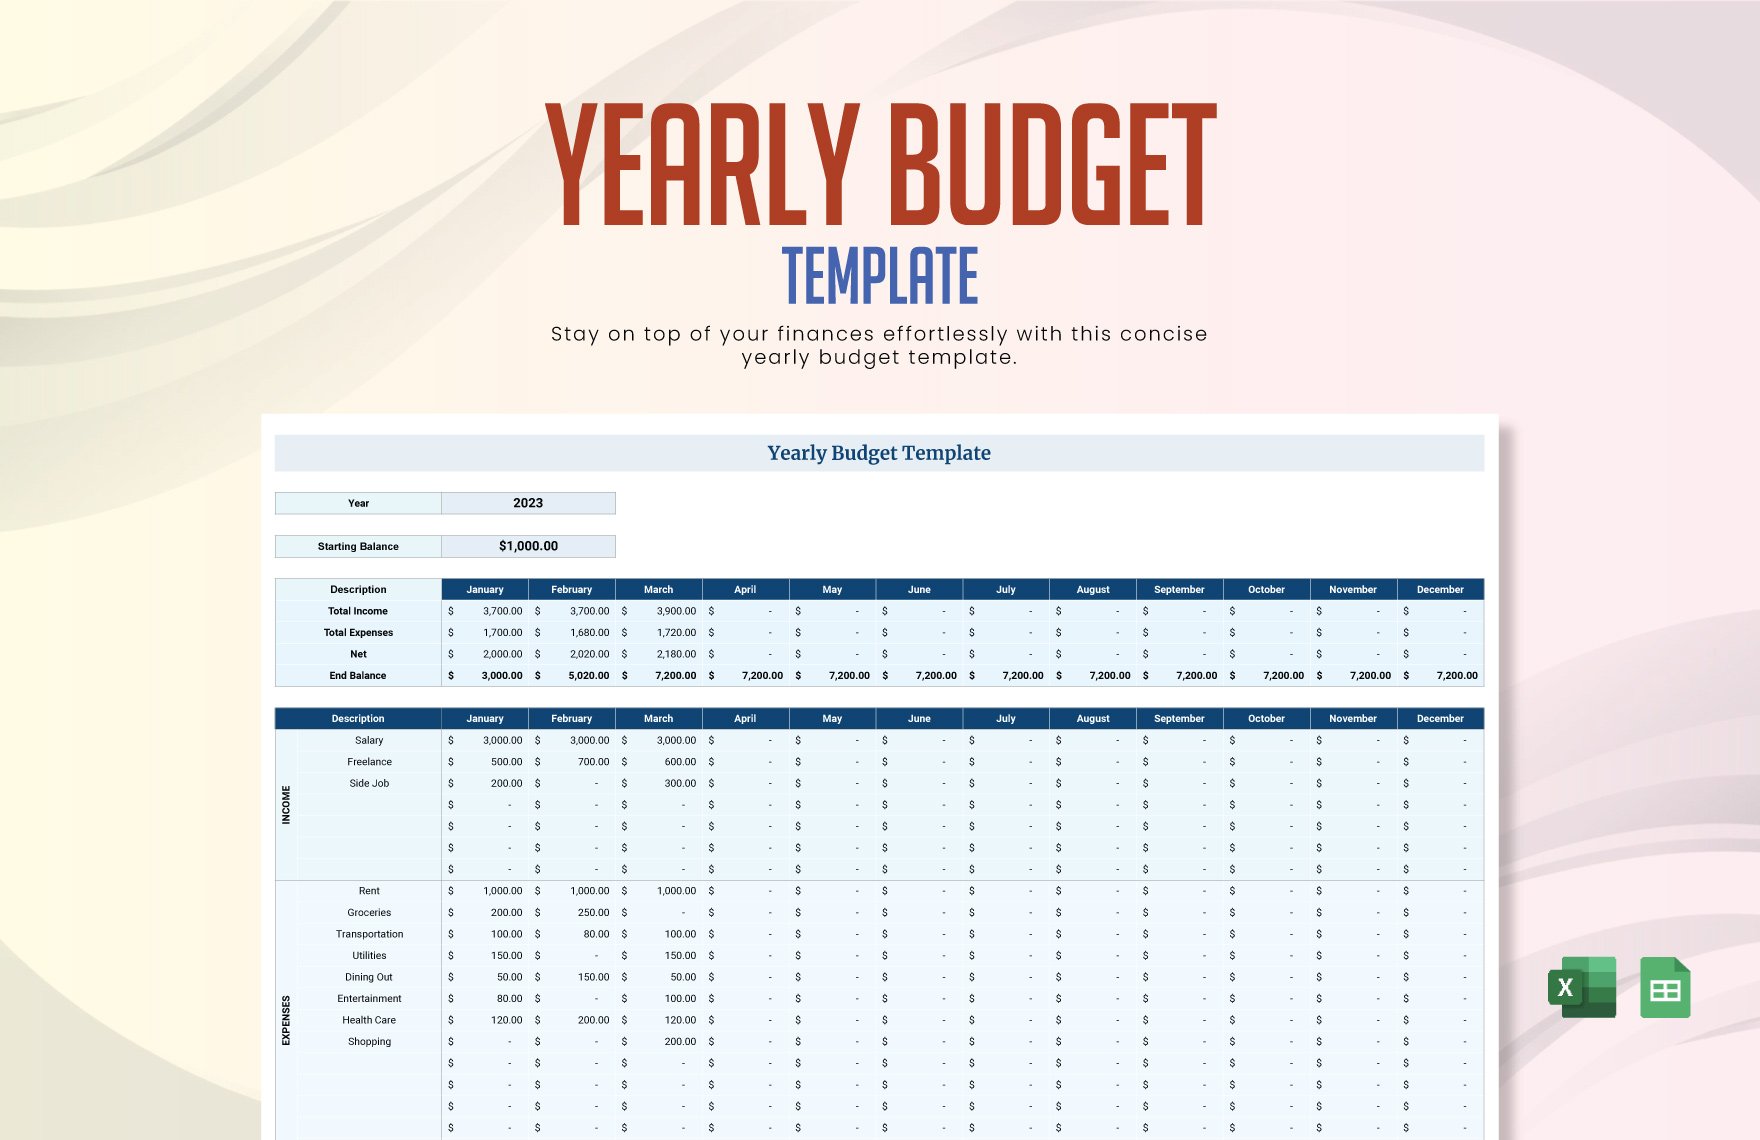 Yearly Budget Template in Excel, Google Sheets